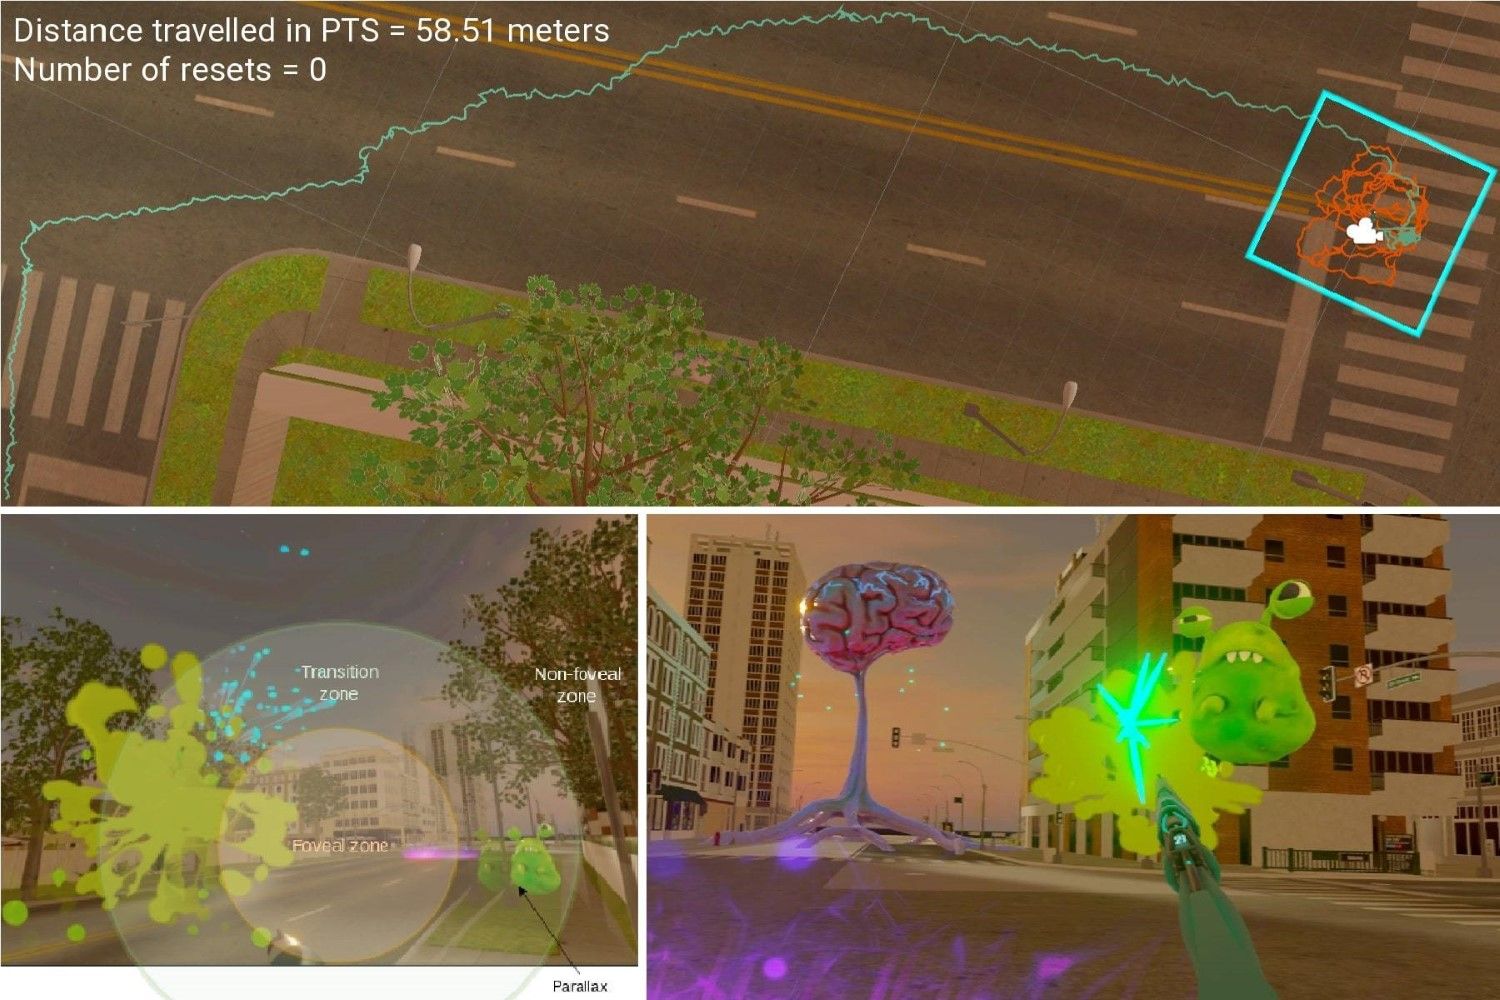 Dynamic Foveated Rendering for Redirected Walking in Virtual Reality, ACM SIGGRAPH 2020